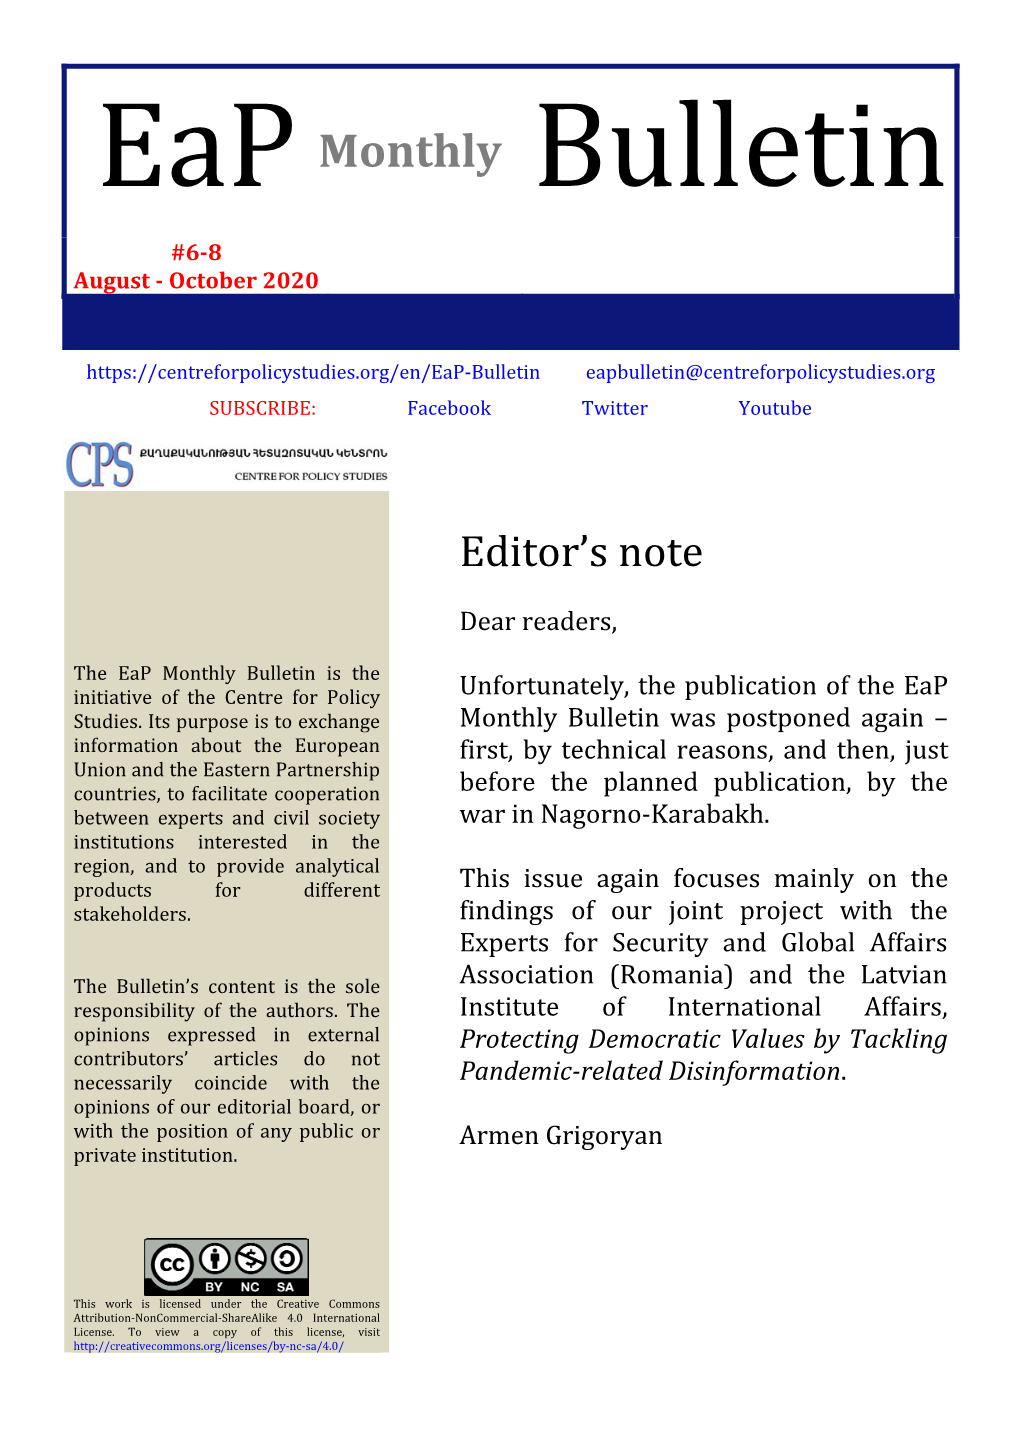 Eap Monthly Bulletin Is the Initiative of the Centre for Policy Unfortunately, the Publication of the Eap Studies